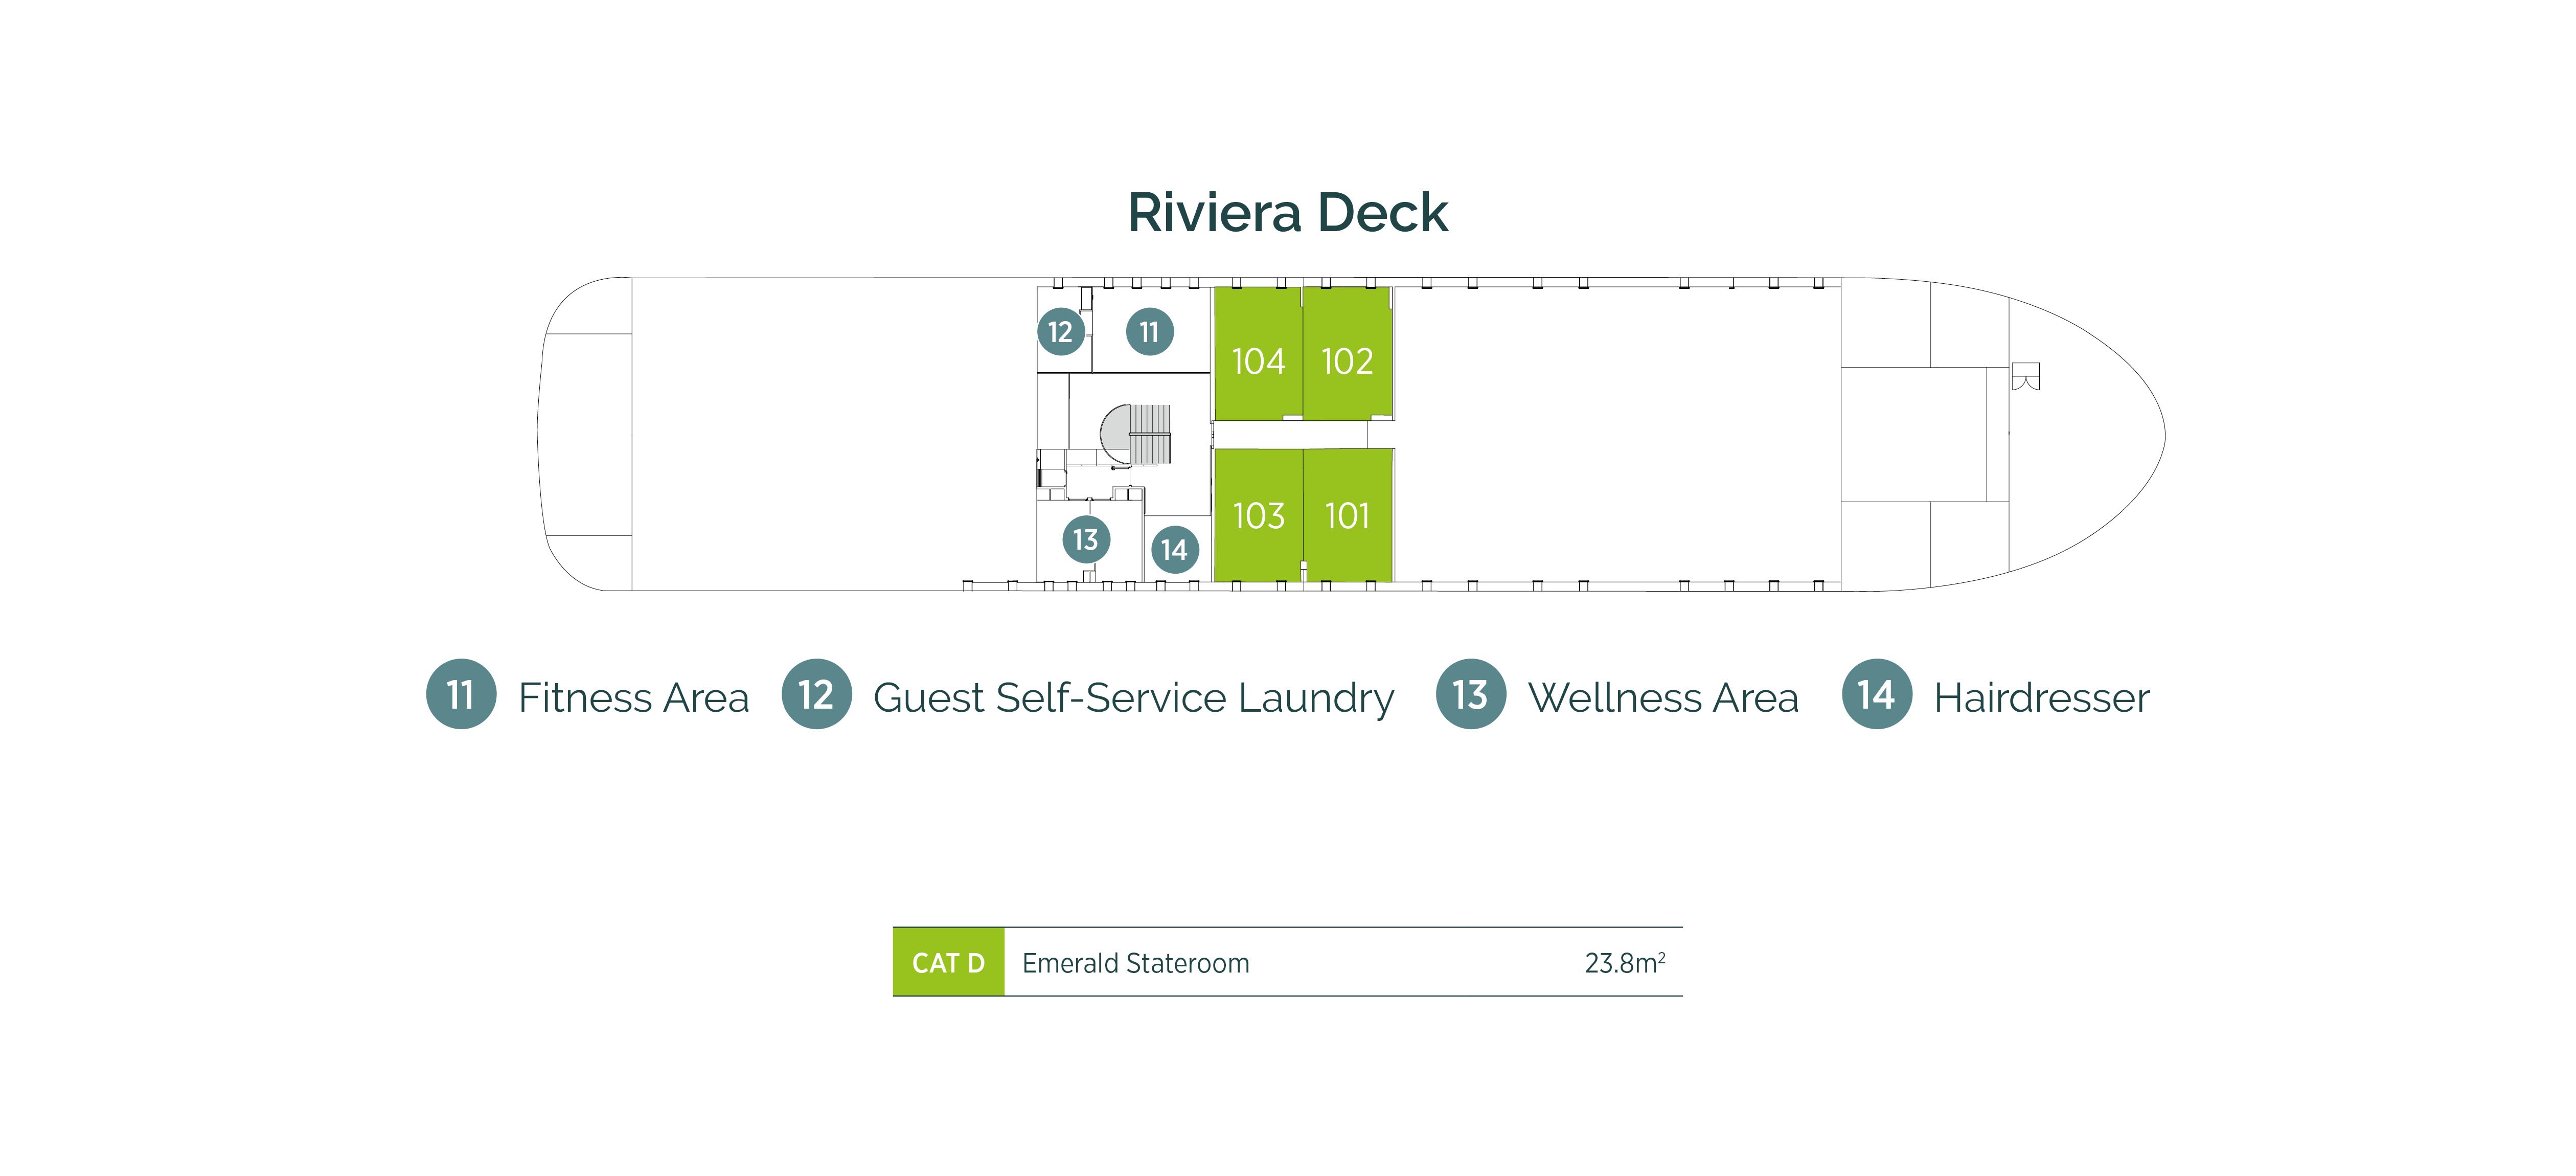 Diagram of ship layout for the Riviera Deck of Emerald Cruises’ Mekong river cruising Star-Ship, Emerald Harmony